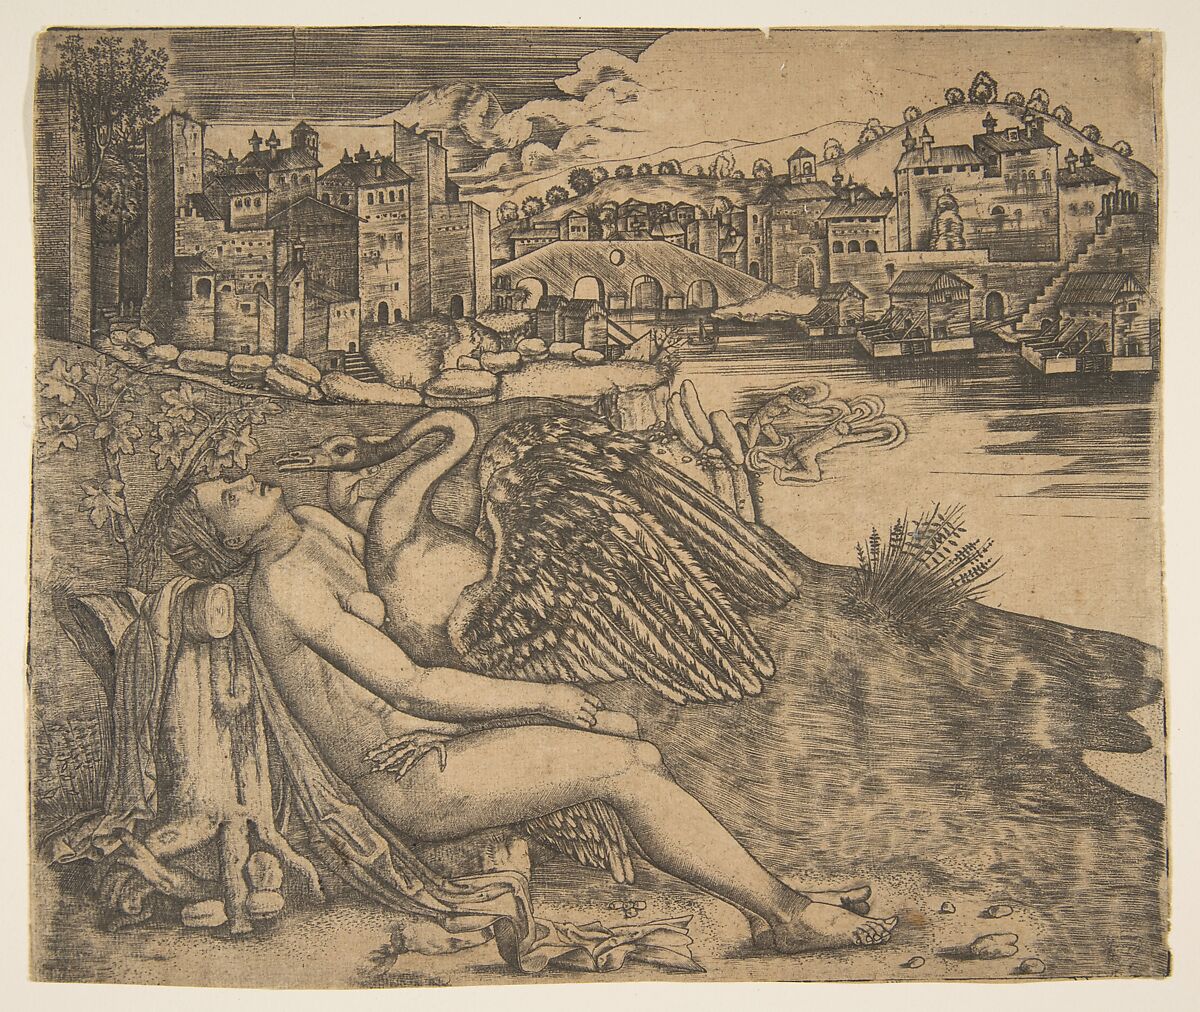 Naked woman (Leda) and swan (Zeus) embrace on a river bank; two figures jump into the water at middle ground; a town and bridge in the background., Anonymous, Italian, 16th century (Italian, active Central Italy, ca. 1550–1580), Engraving 